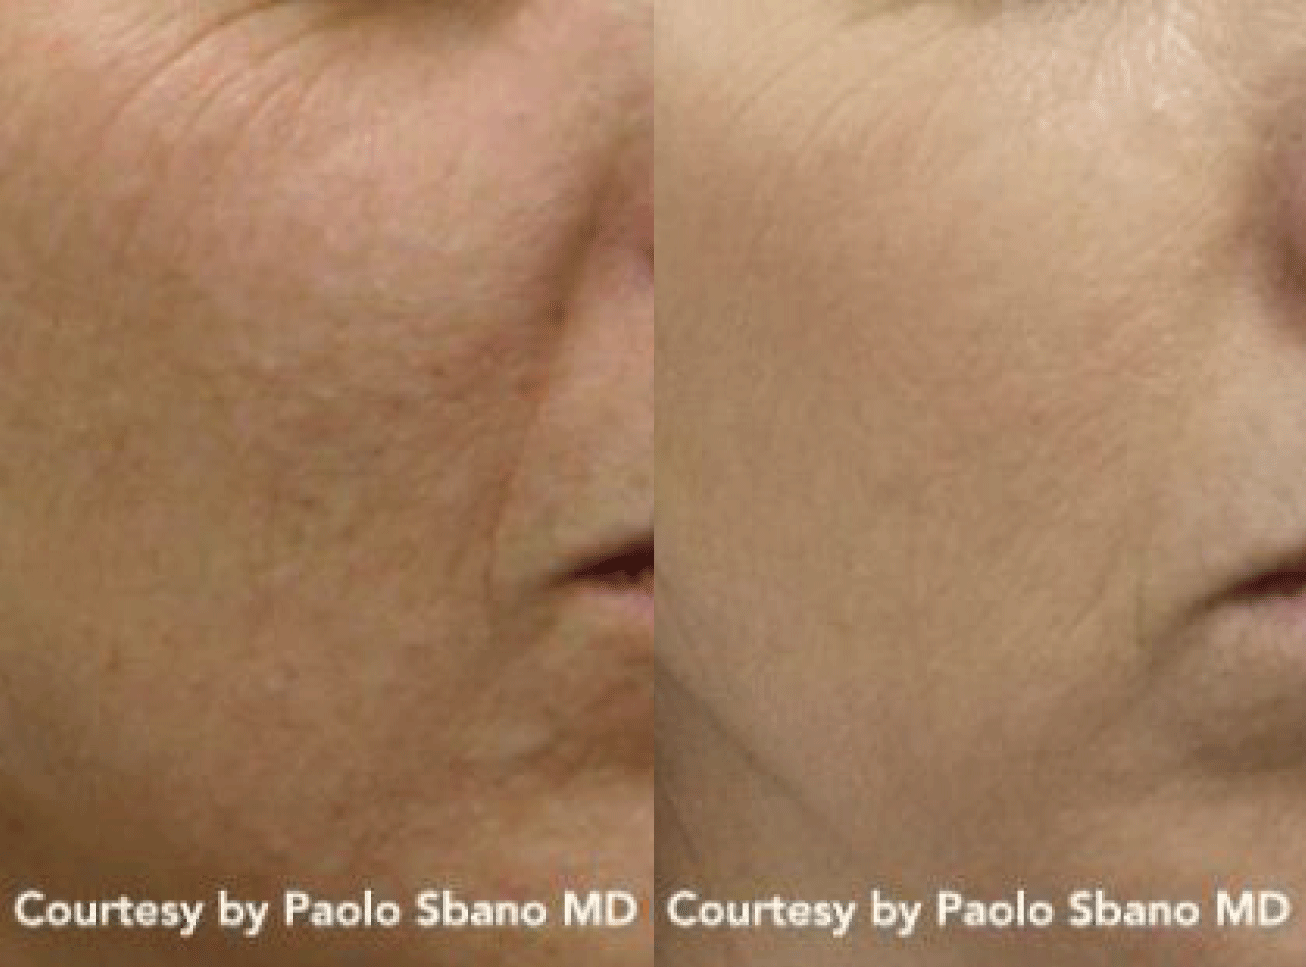 Discovery PICO Treatment Before & After Image | Avail Aesthetics in NC